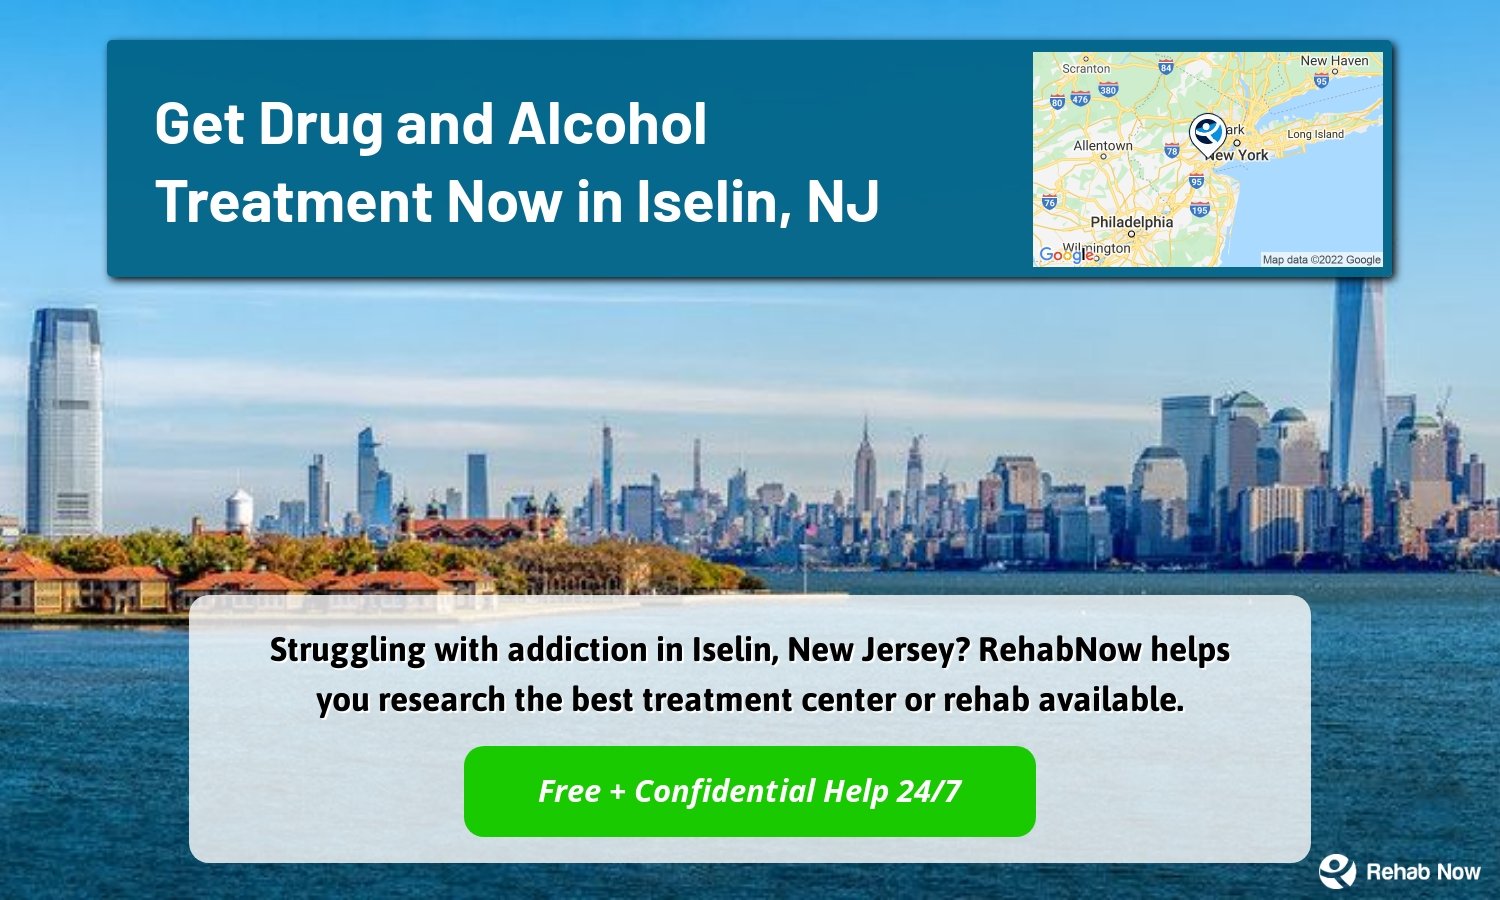 Struggling with addiction in Iselin, New Jersey? RehabNow helps you research the best treatment center or rehab available.